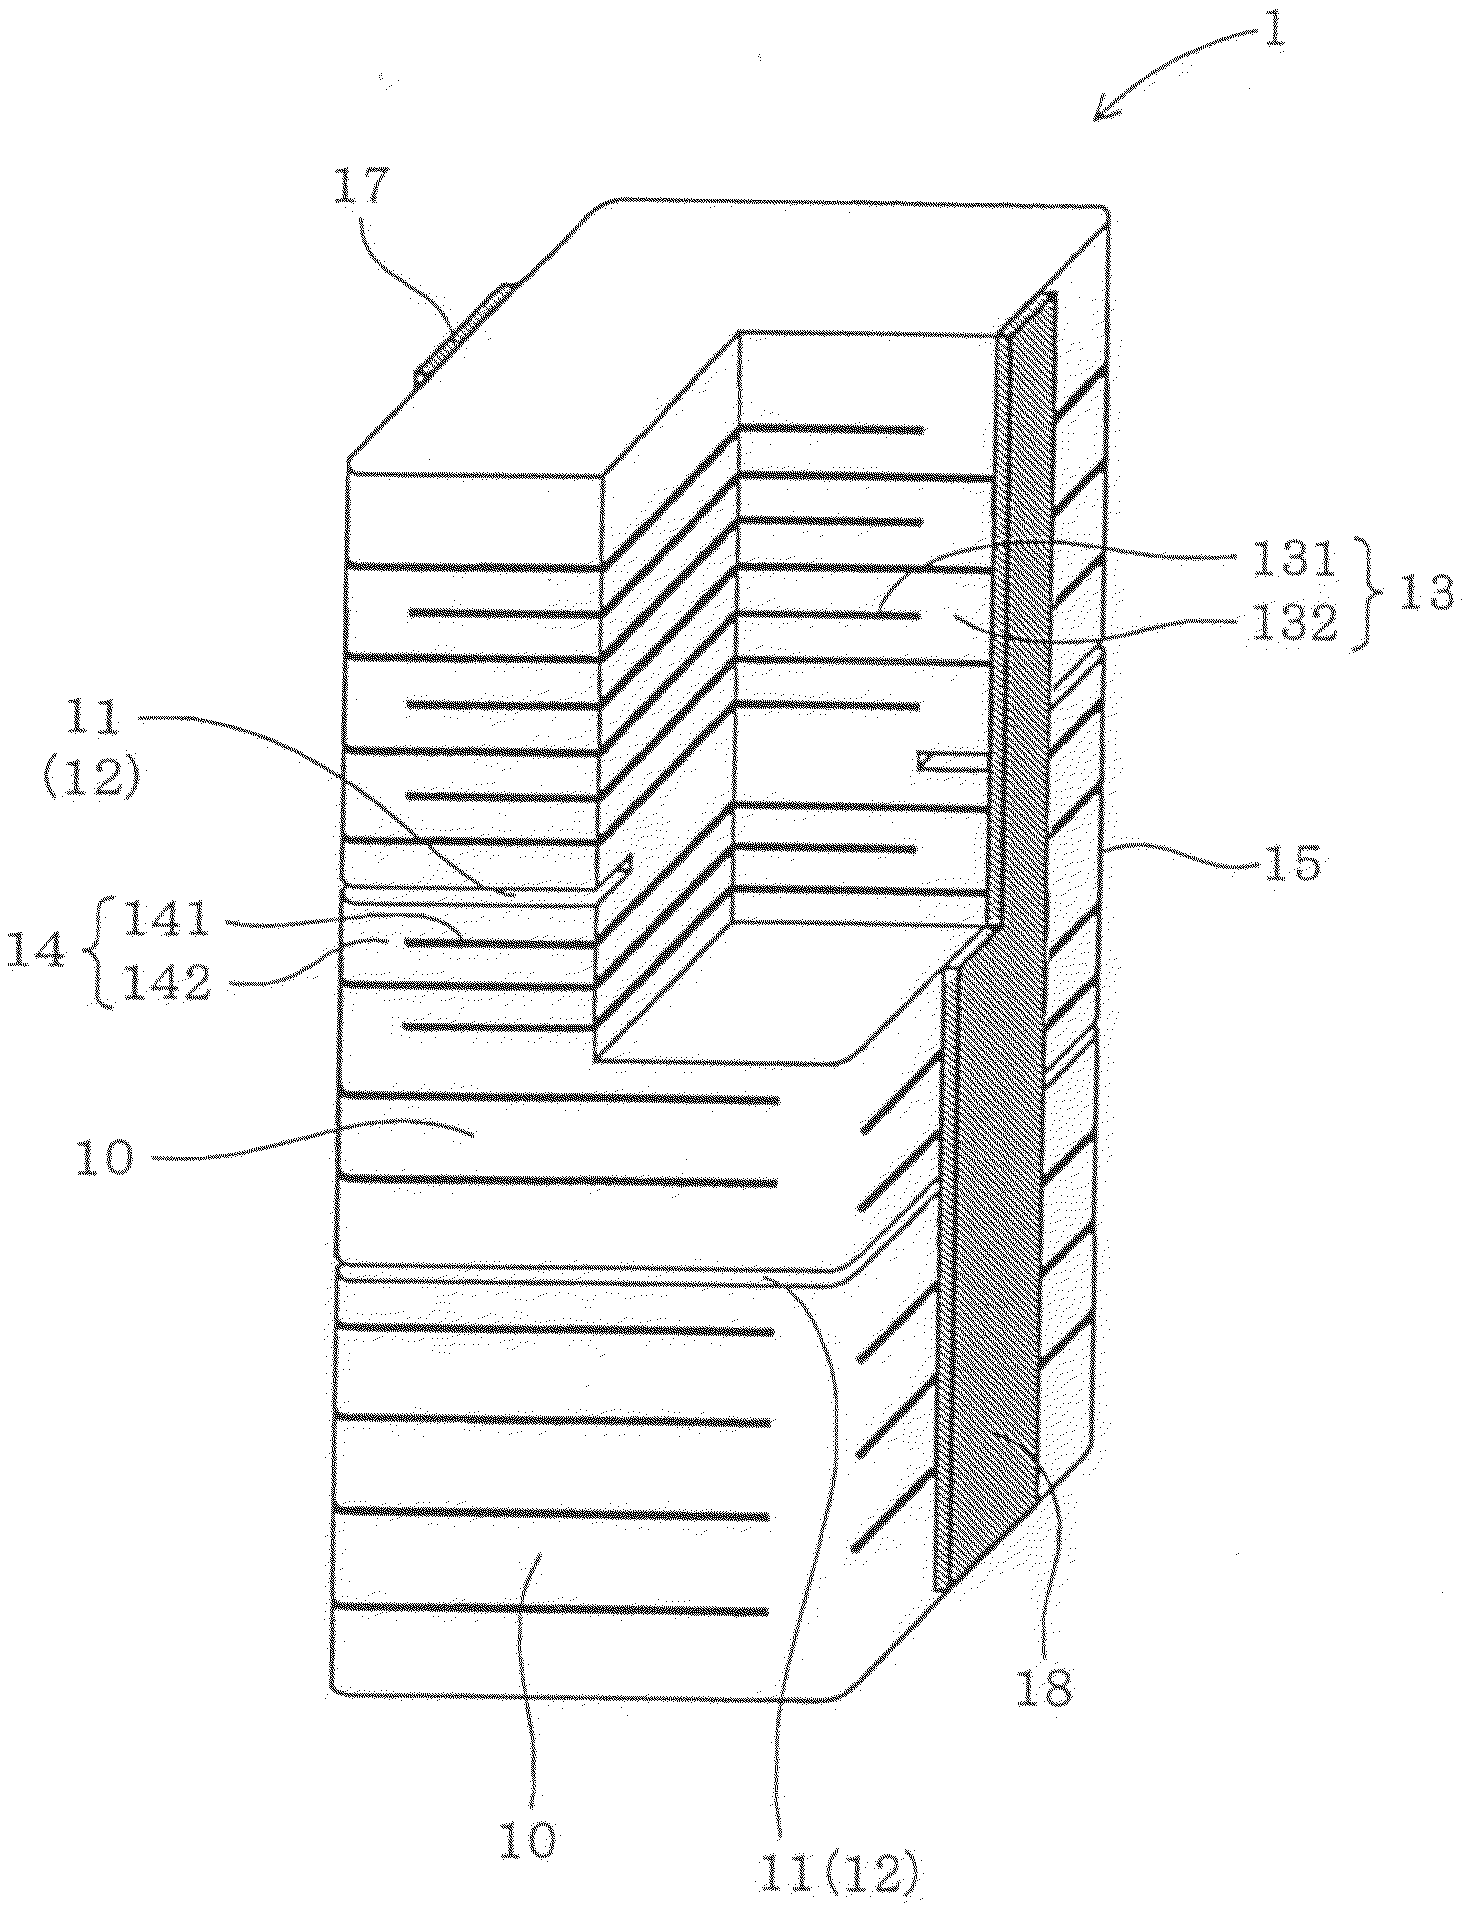 Stacked piezoelectric device